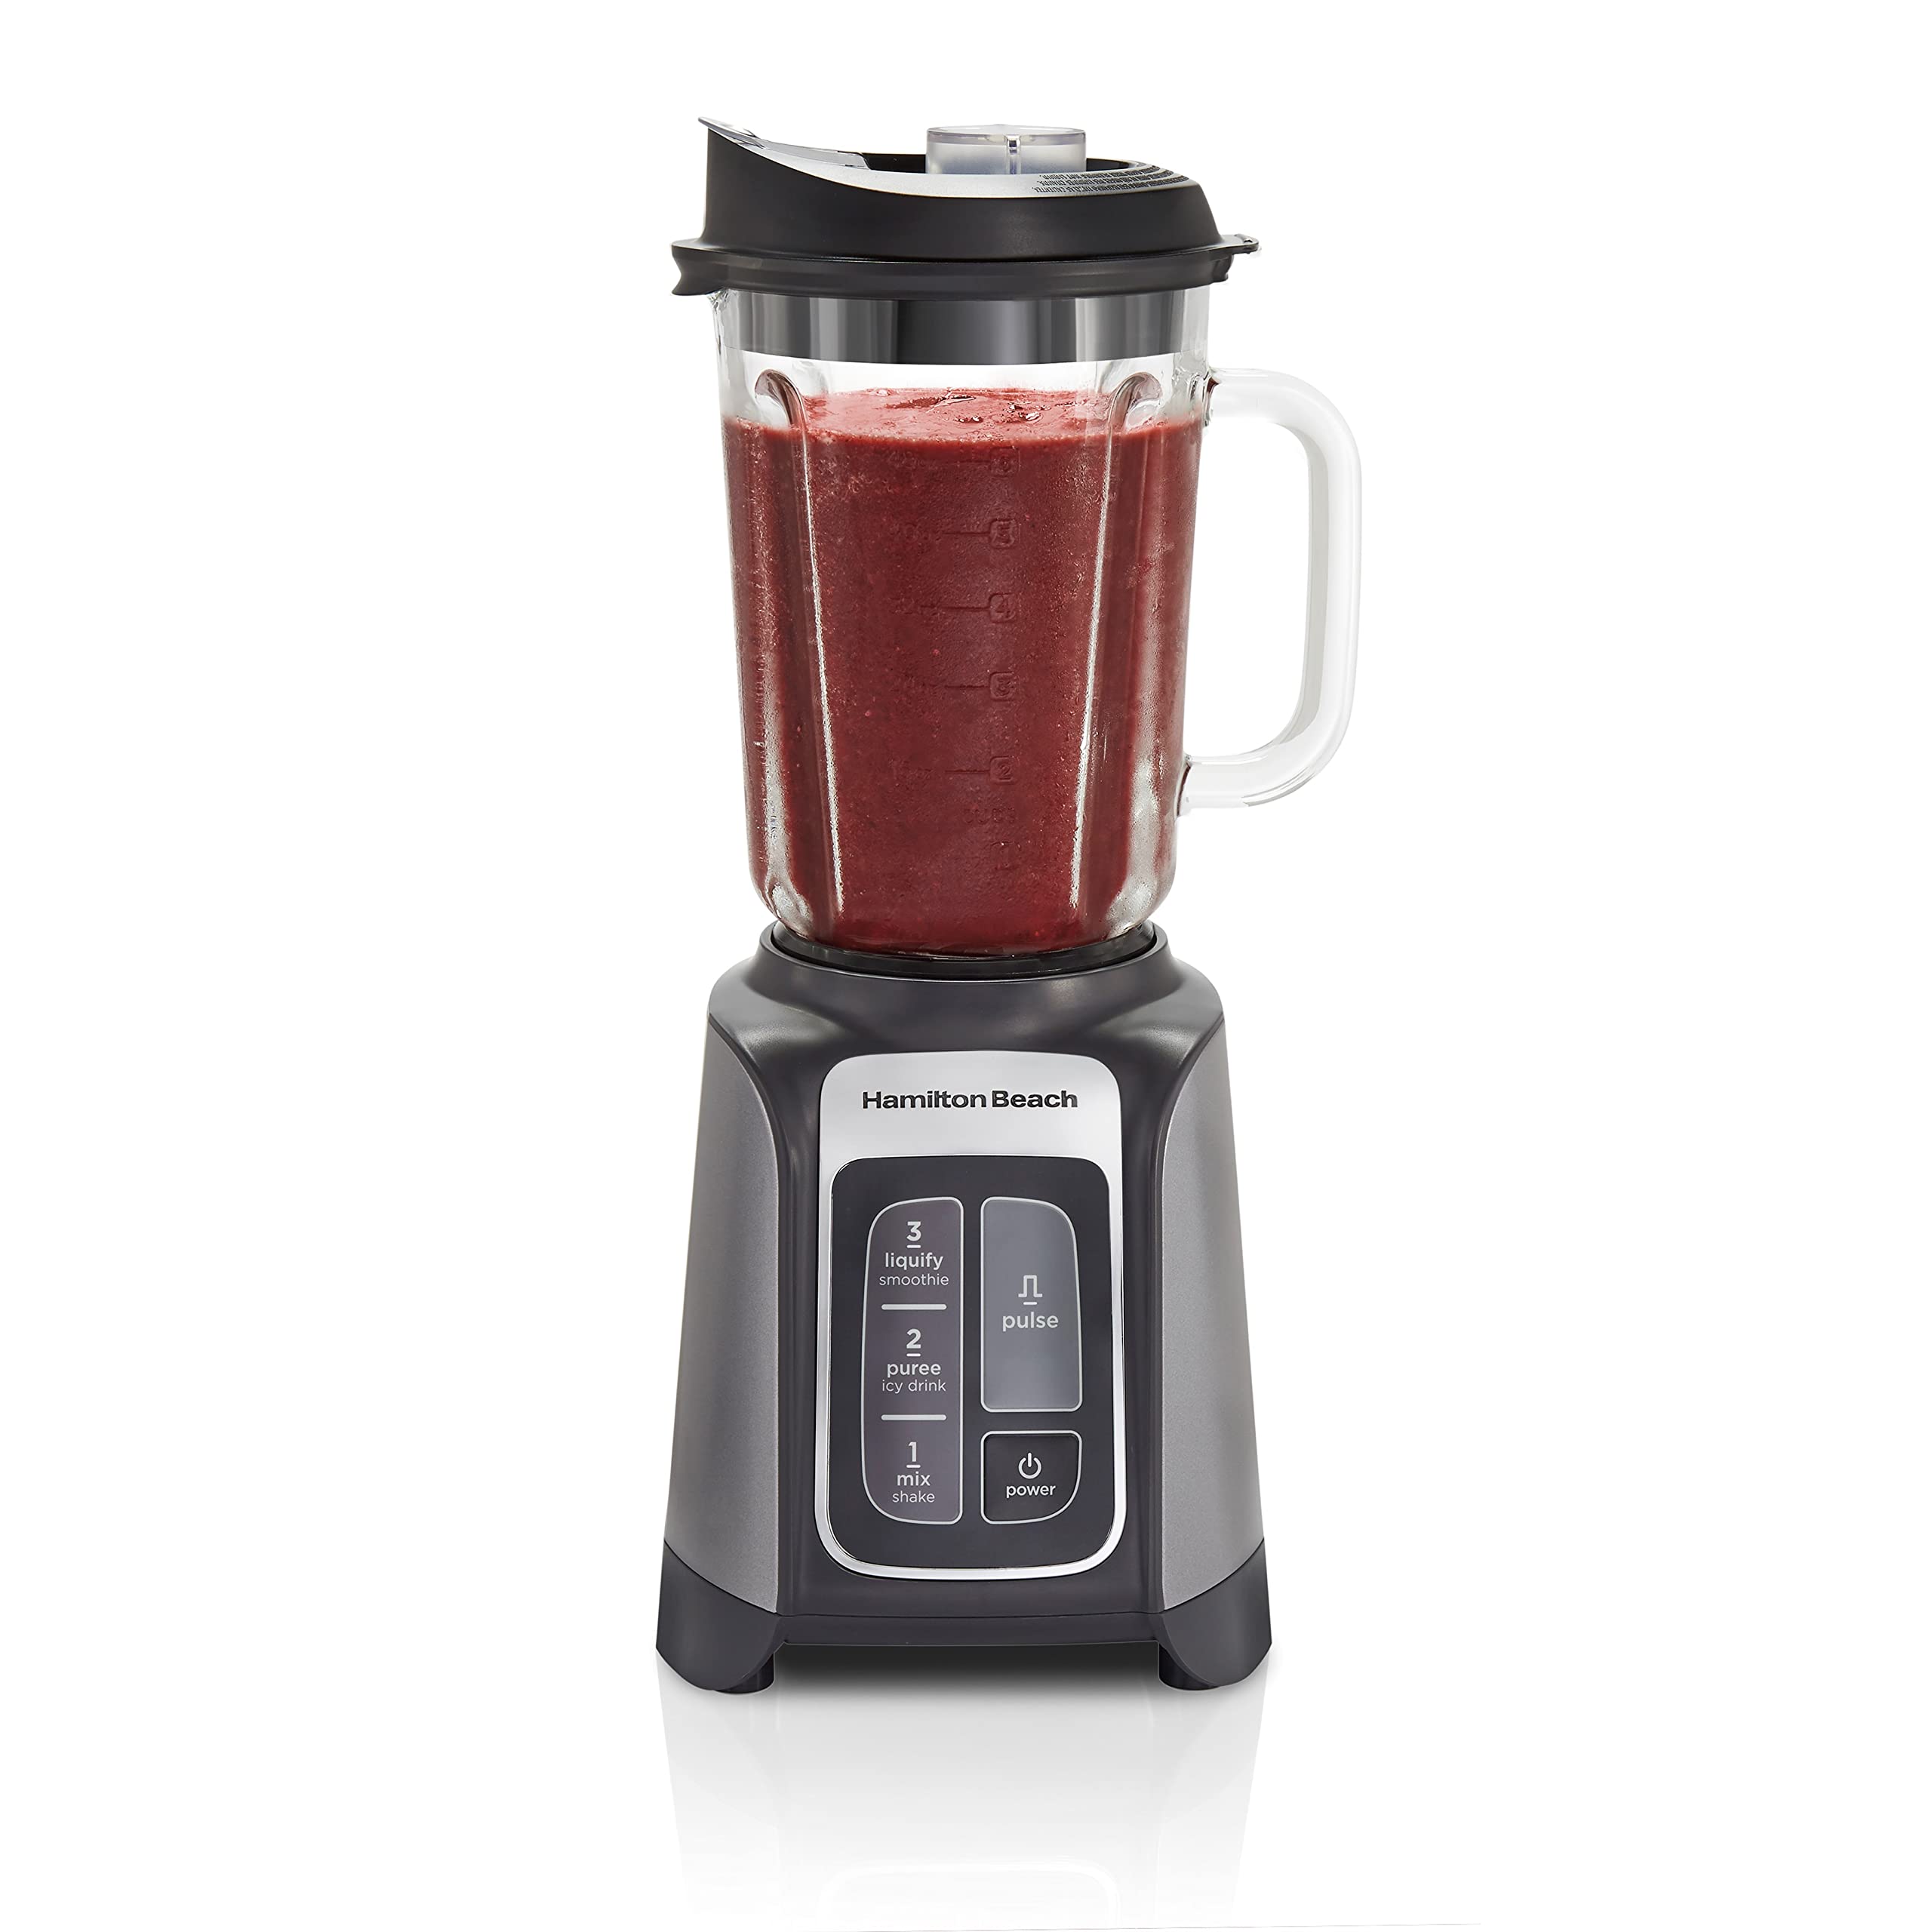 Hamilton Beach PowerMax Professional-Performance Blender for Shakes and Smoothies, Puree and Ice Crush, 48oz BPA-Free Glass Jar, 1680 Watts, Stainless Steel Blades (58600) GREY